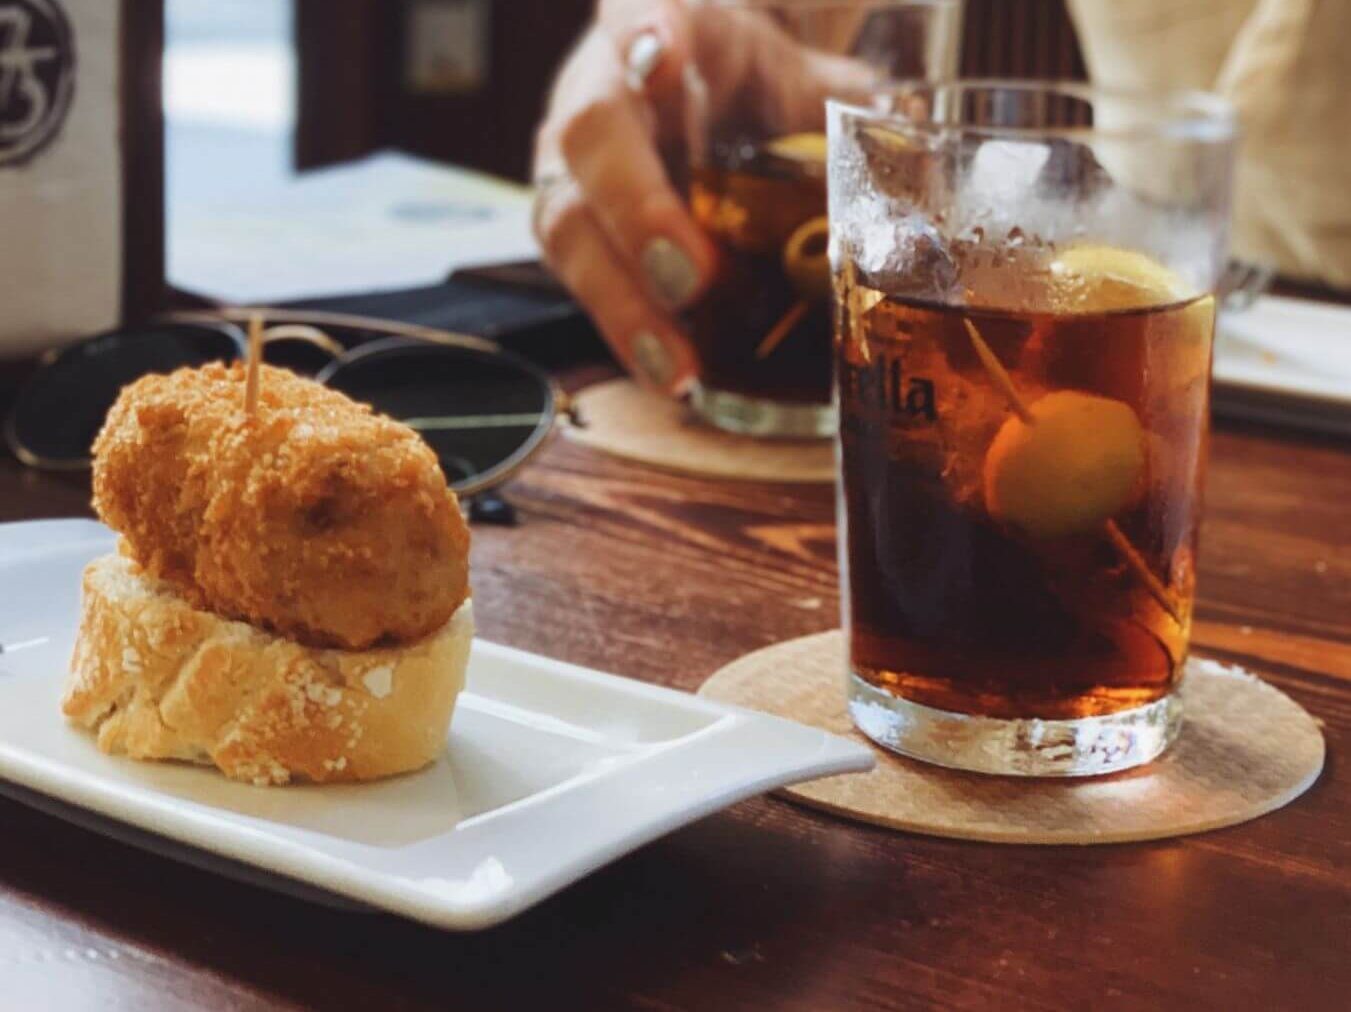 Two drinks with a plate of croquette on bread, like a pintxo